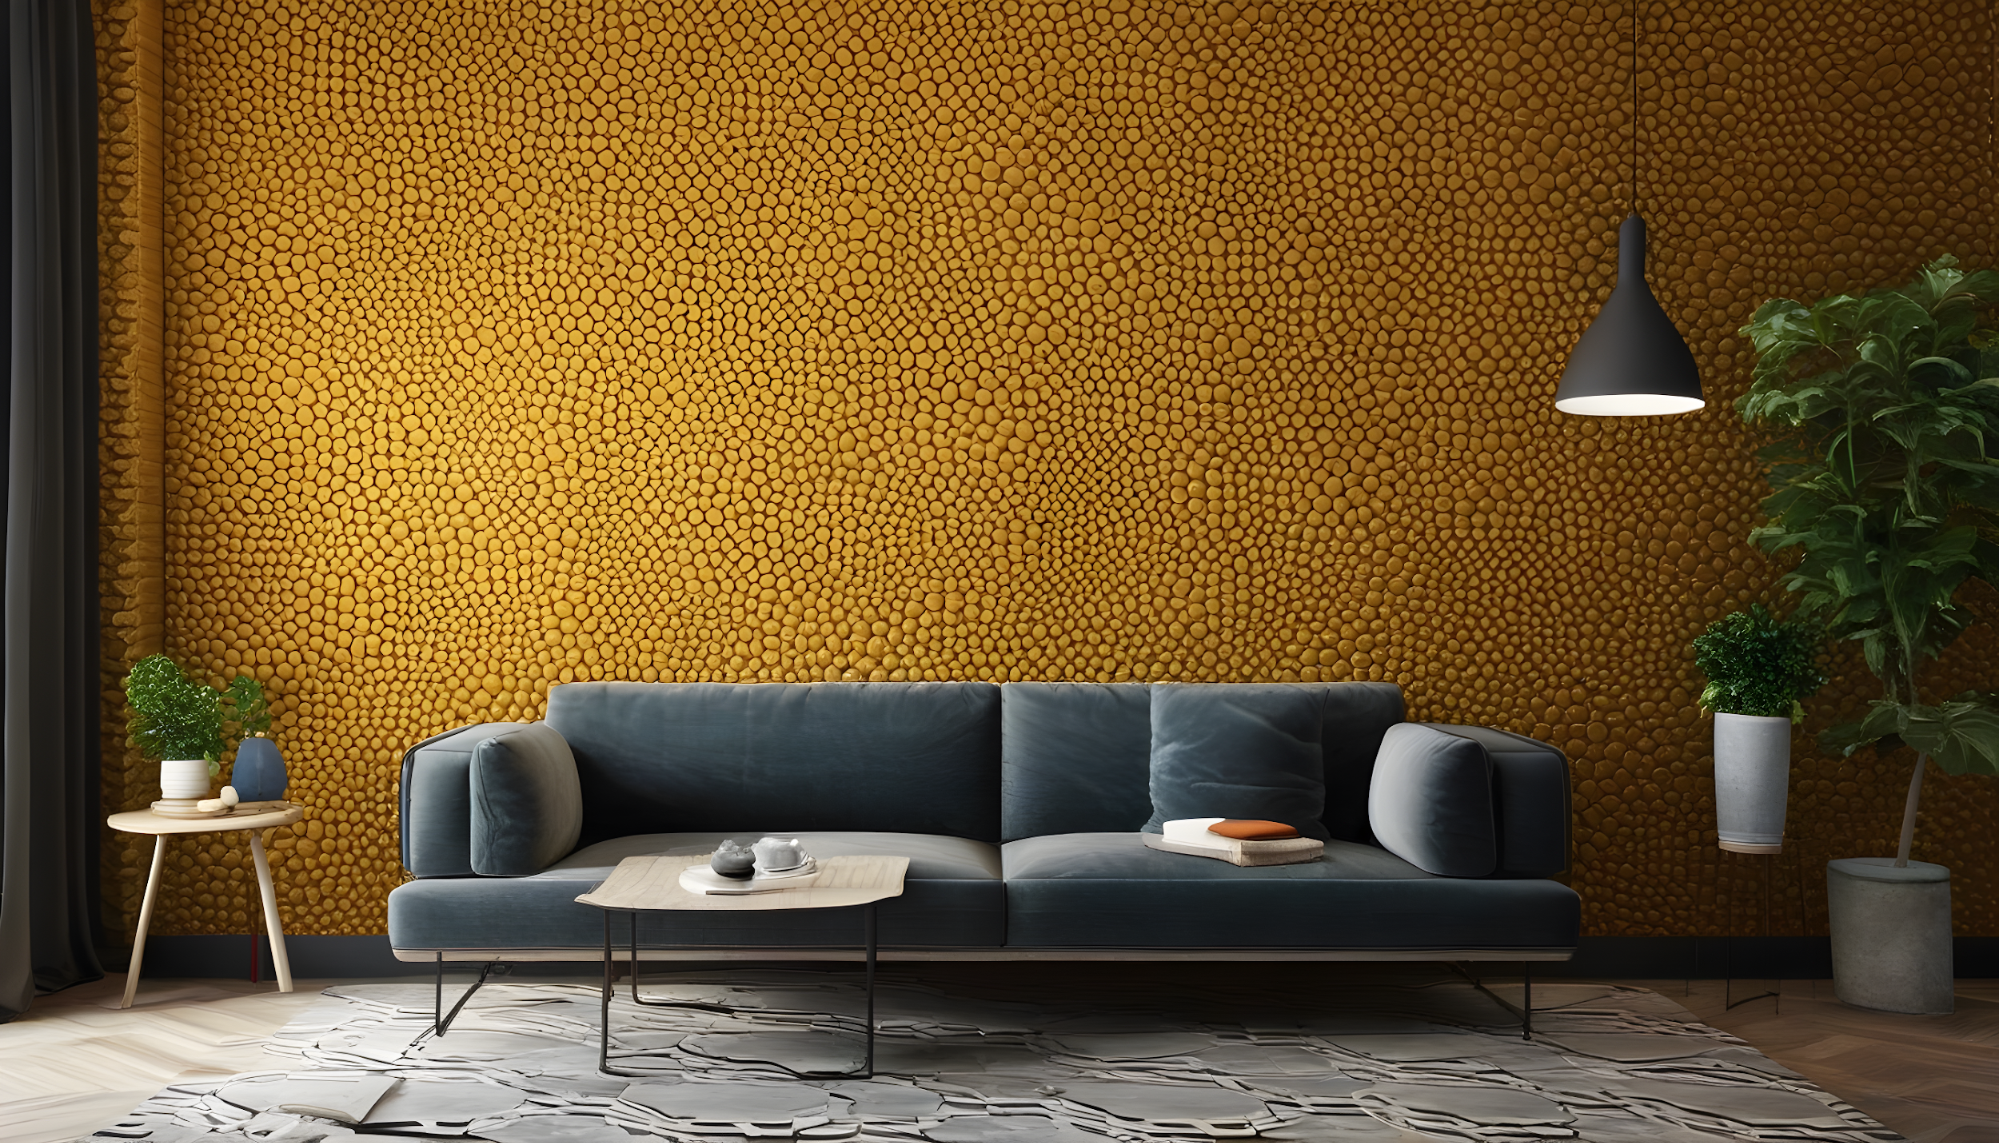 Hive Texture living room wall